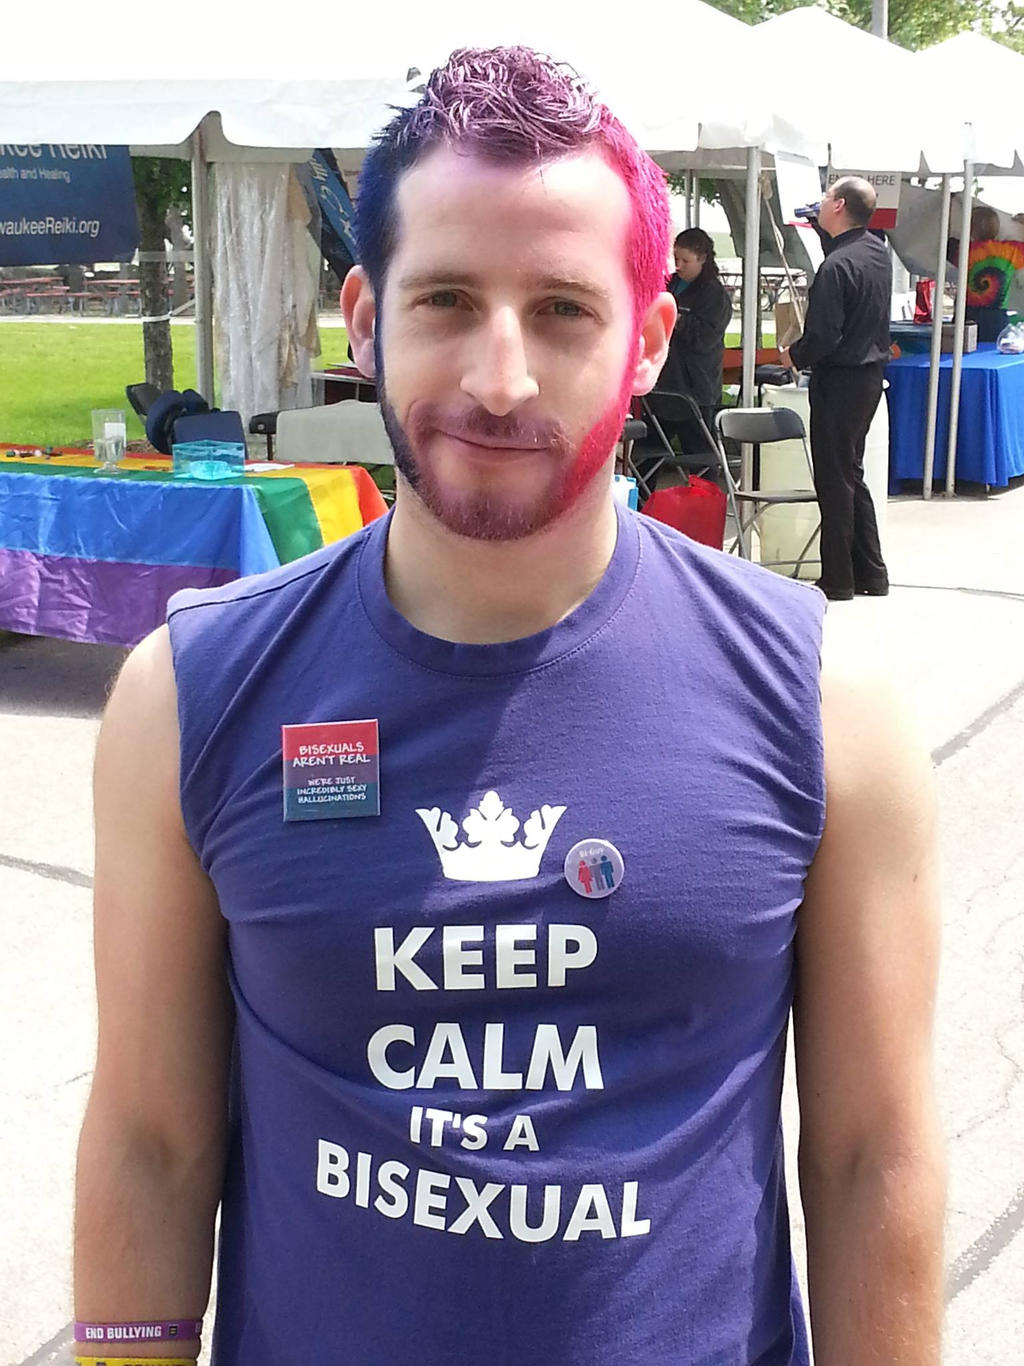 Keep Calm It's a Bisexual